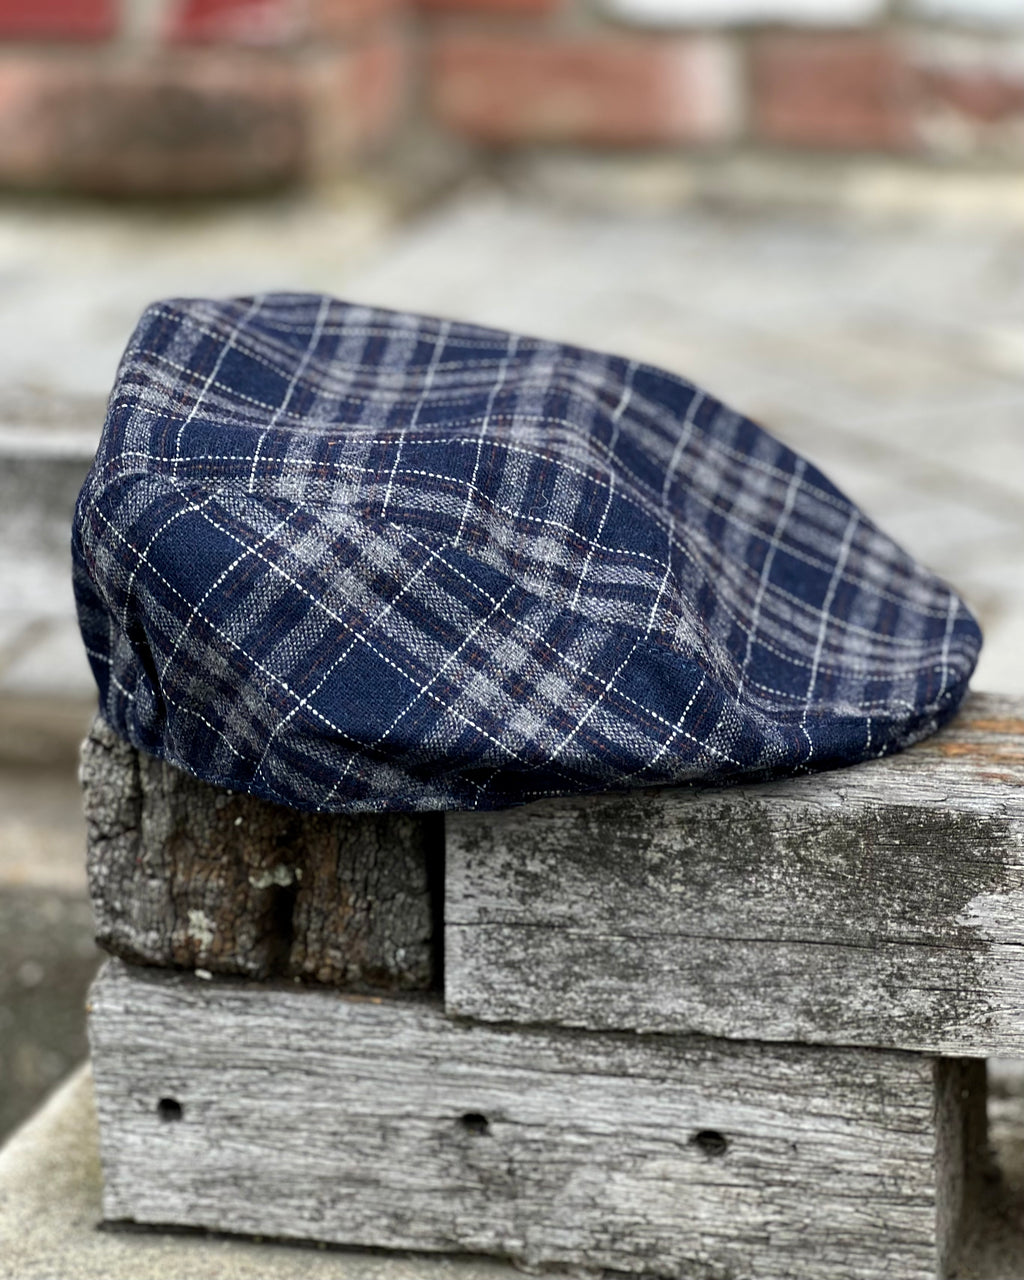 Navy and grey check cheese cutter cap by Electric Pukeko - retro style cap 